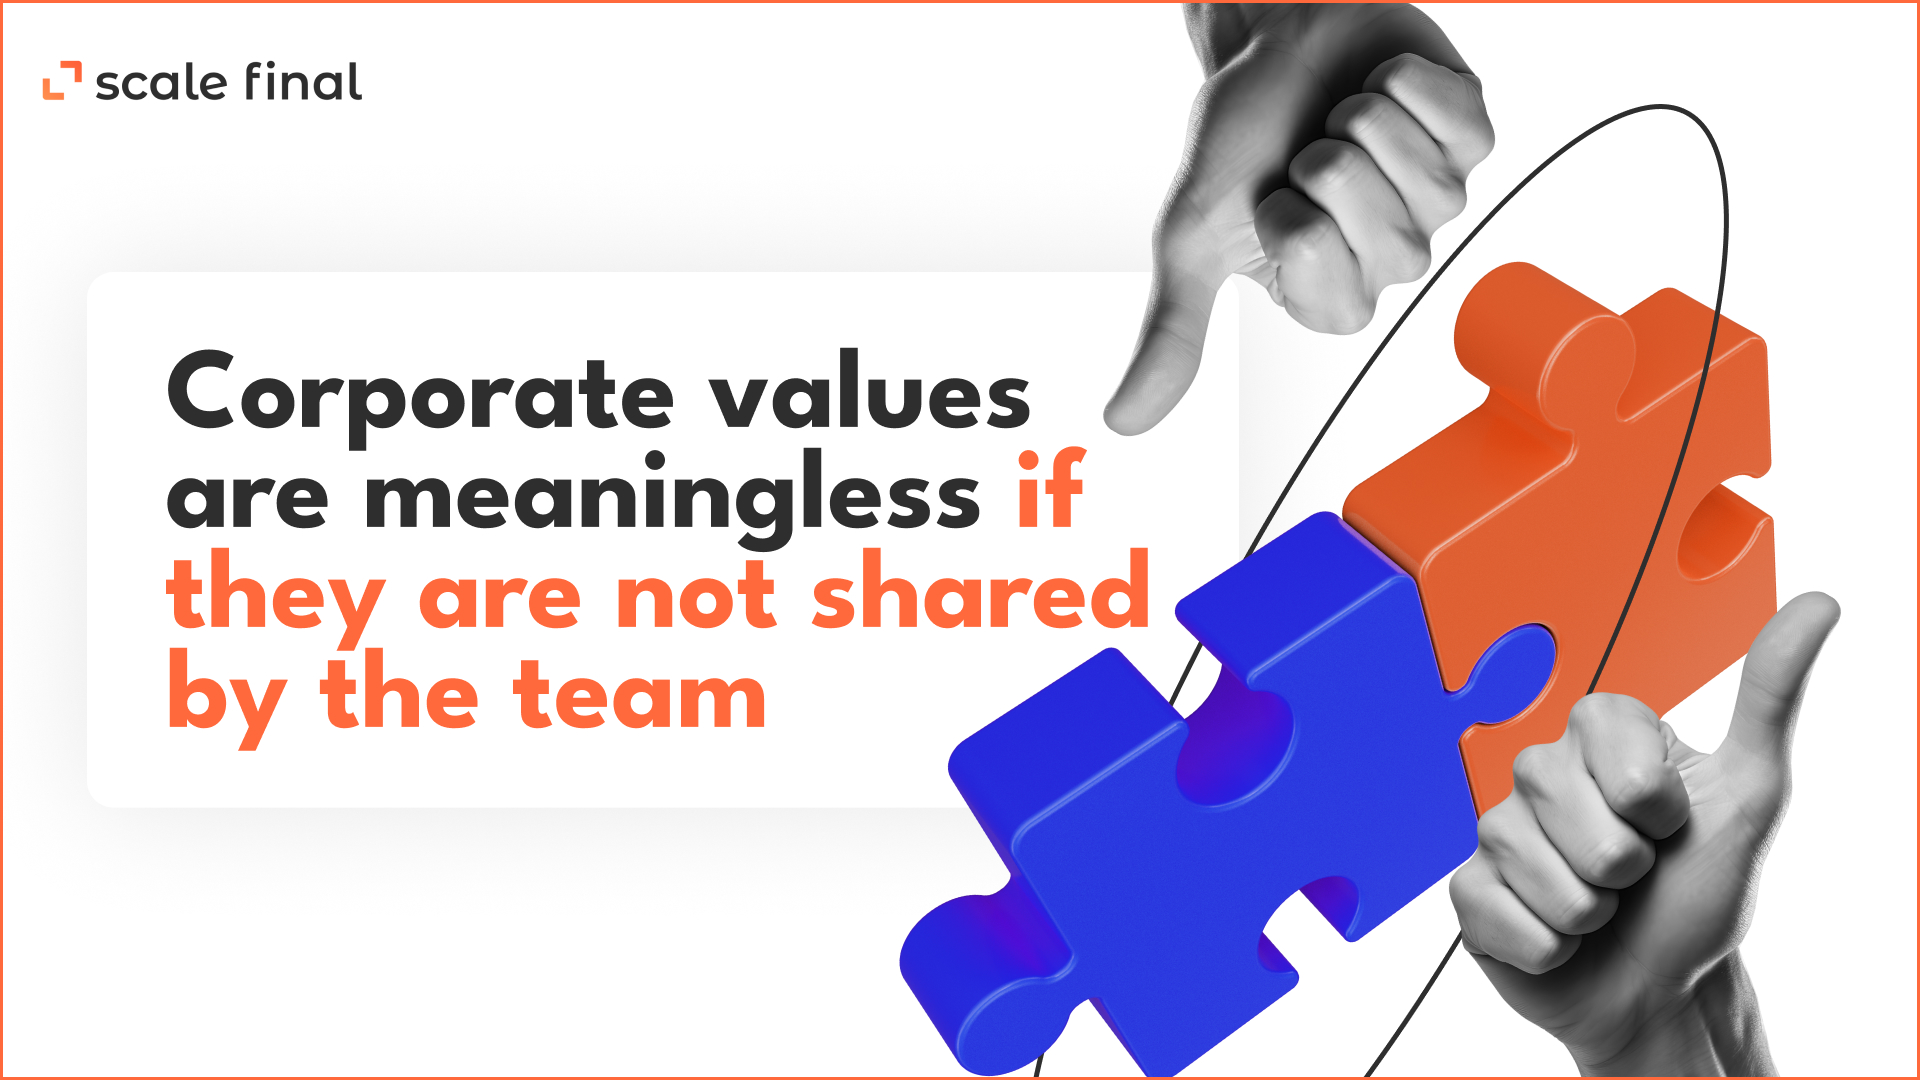  Corporate values are meaningless if they are not shared by the team.